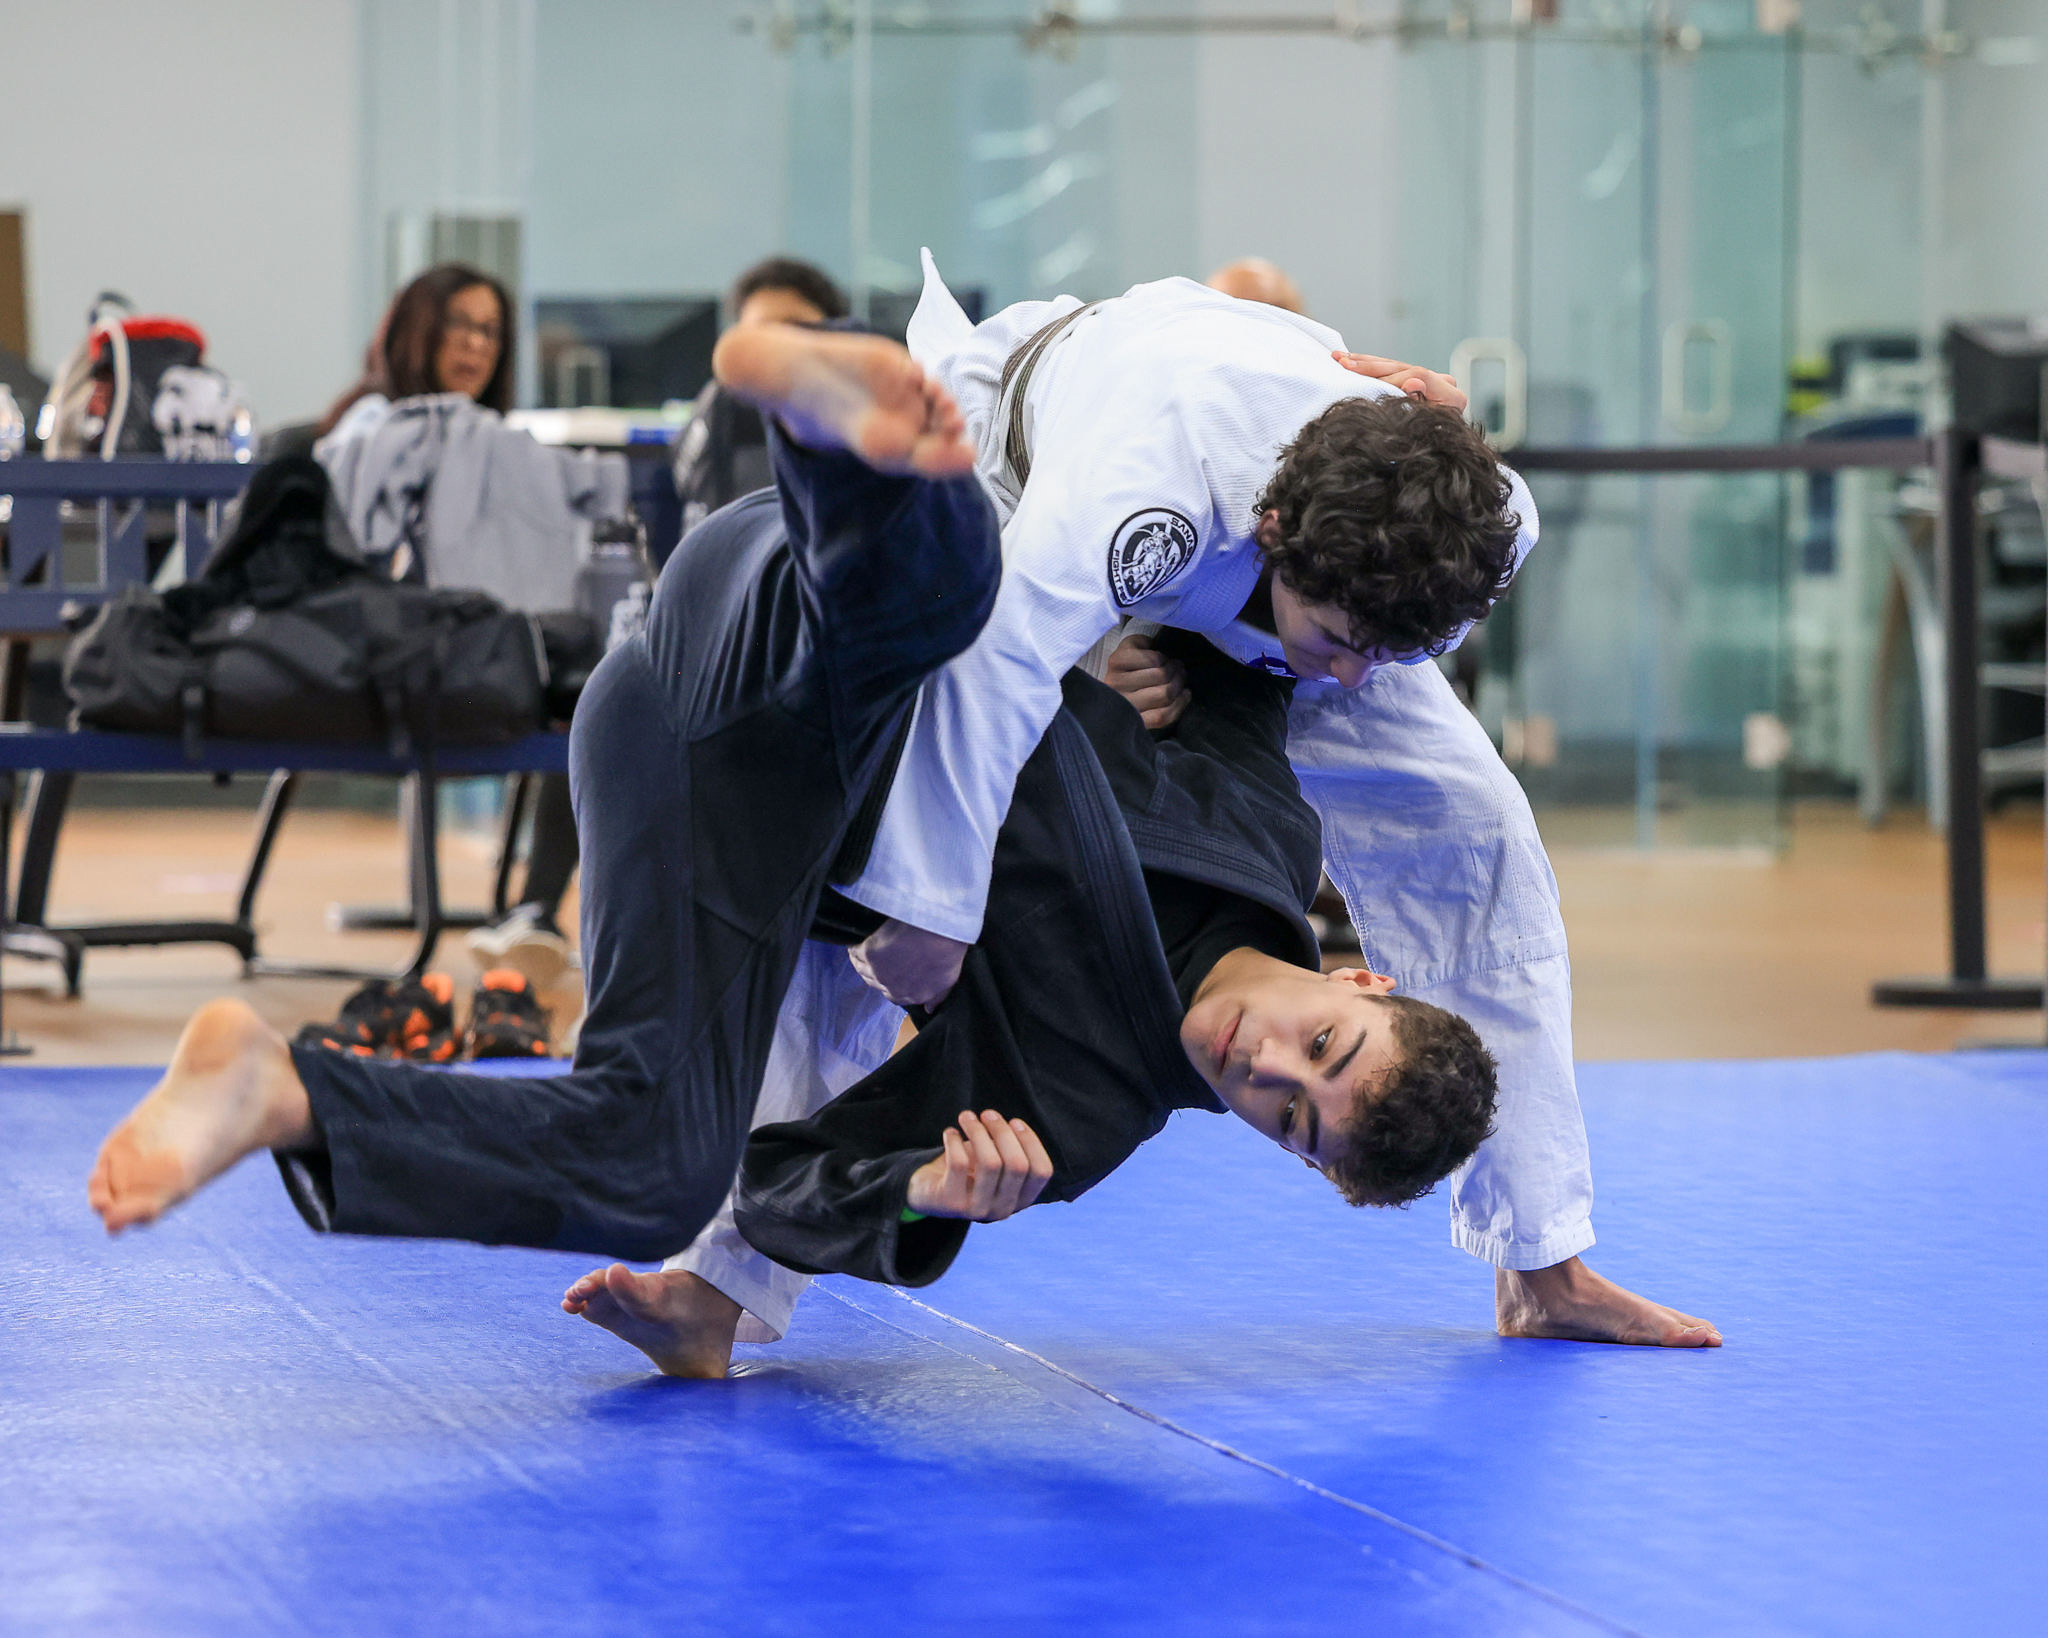 Am I Too Far or Too Close? – Ranges in Martial Arts and Self-Defense